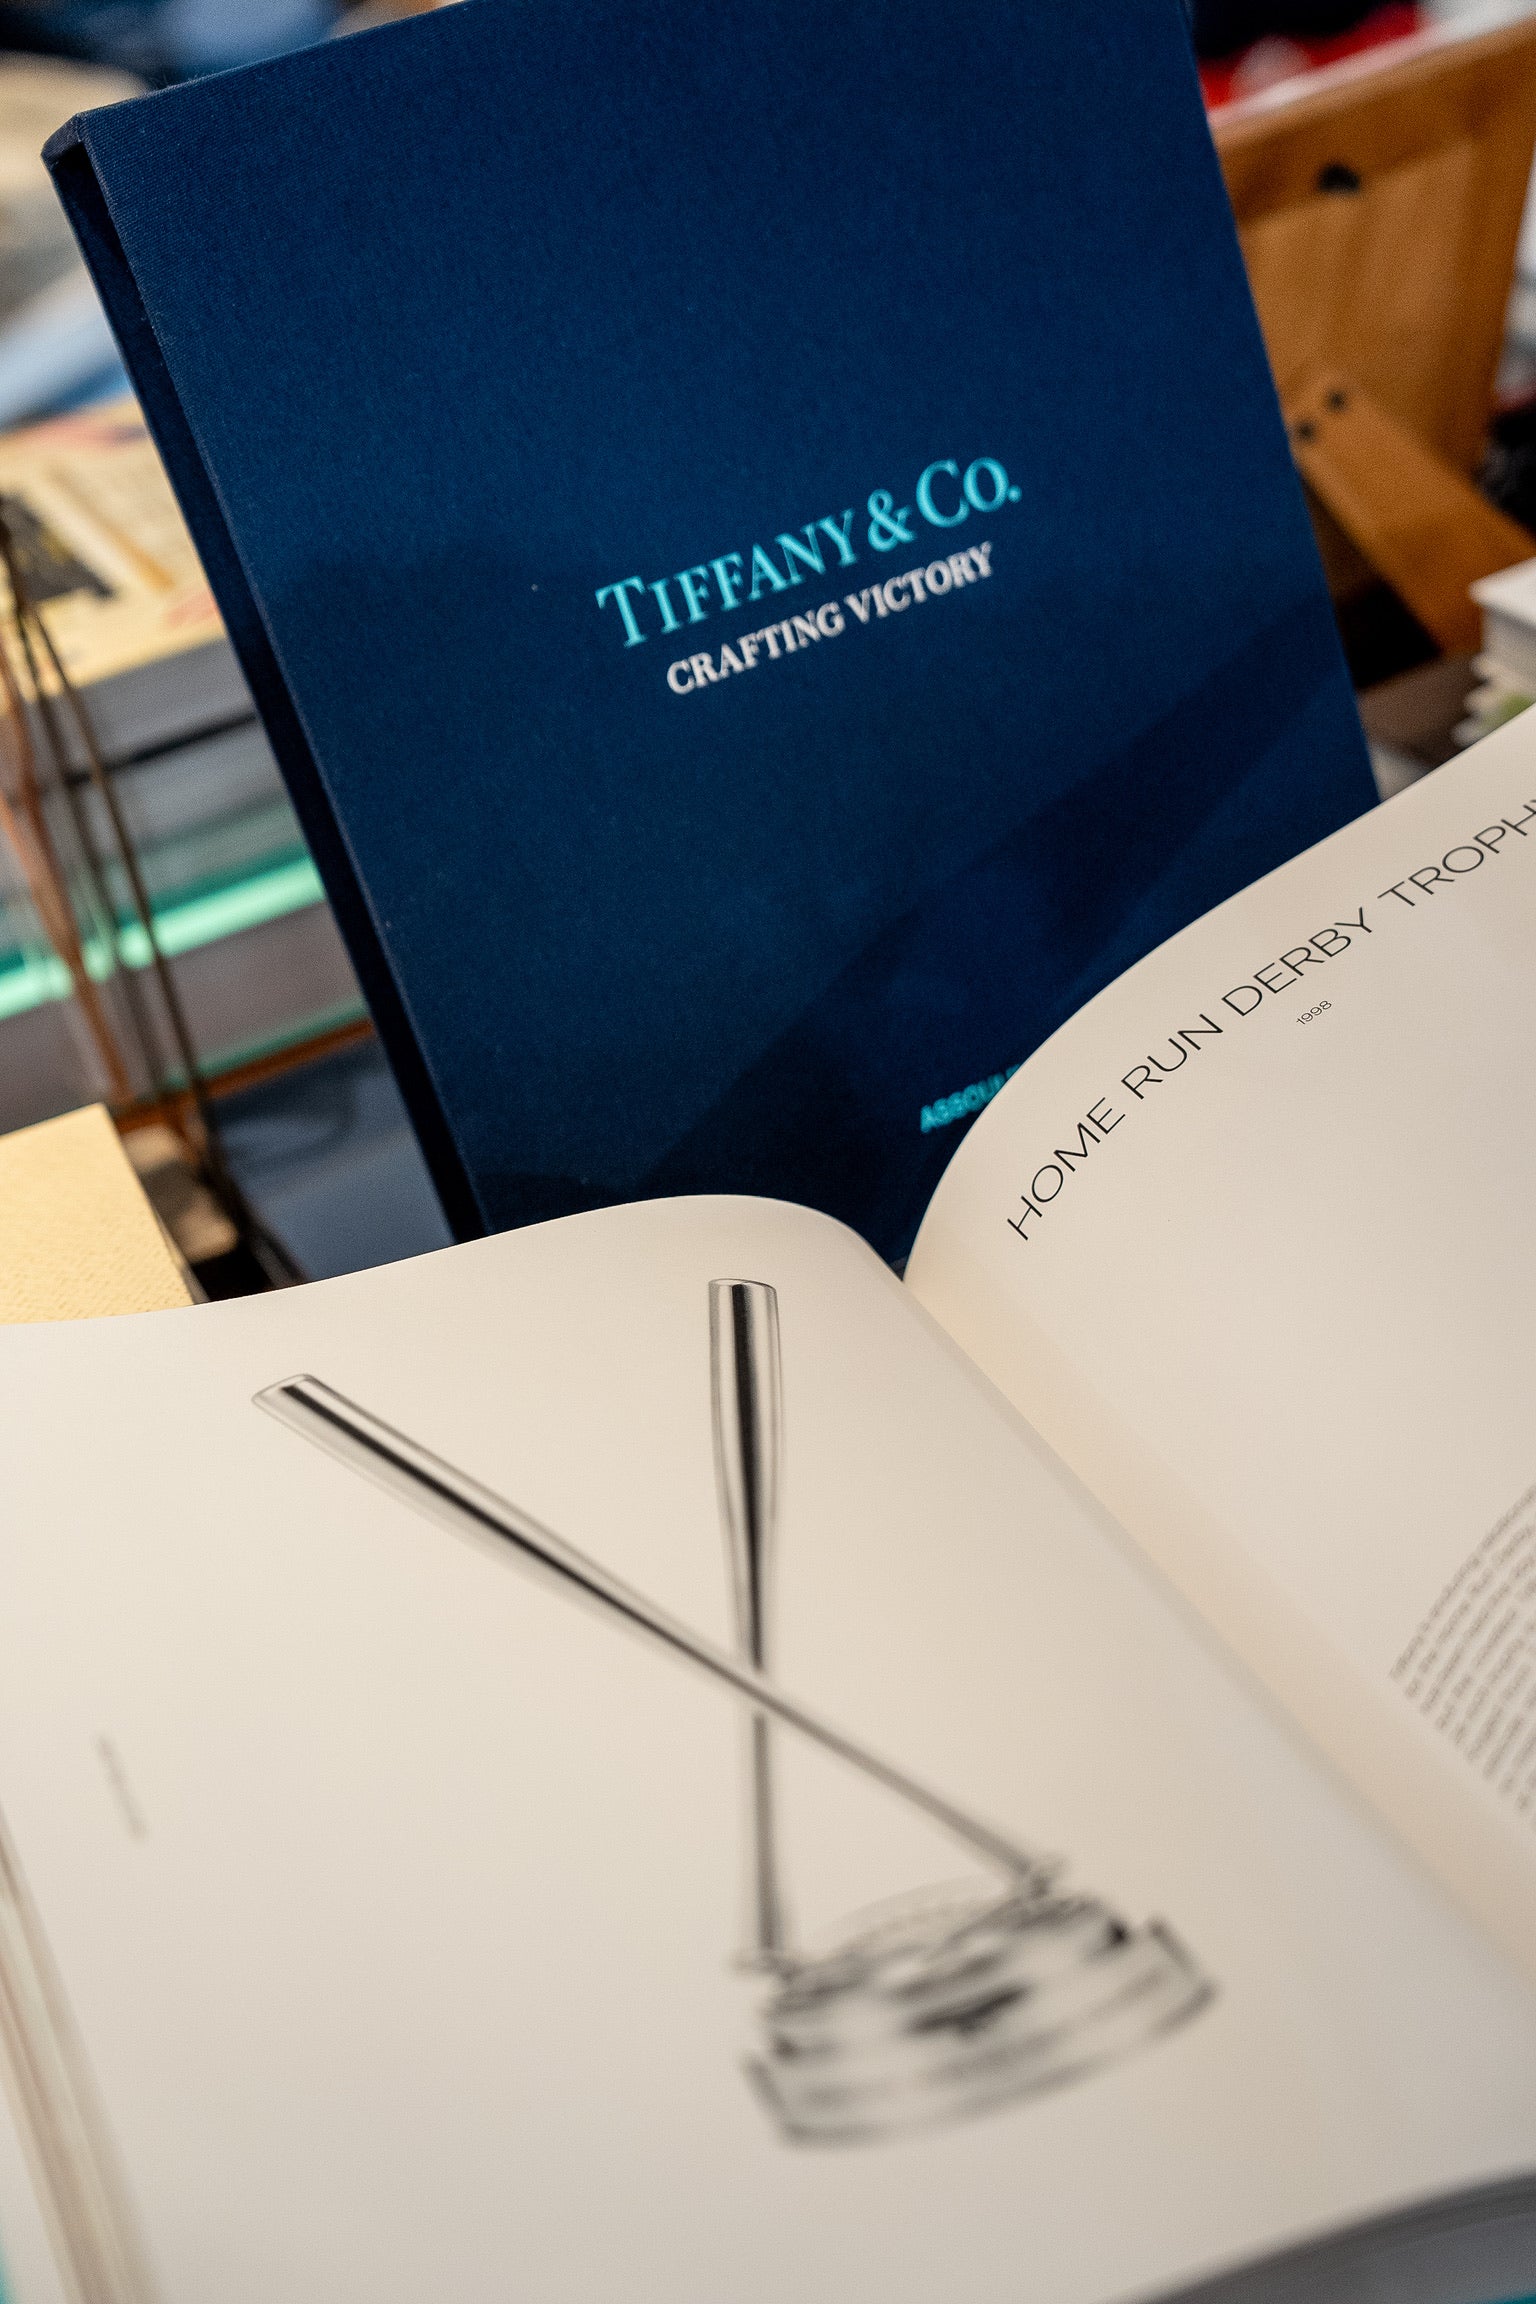 Tiffany & Co.: Crafting Victory